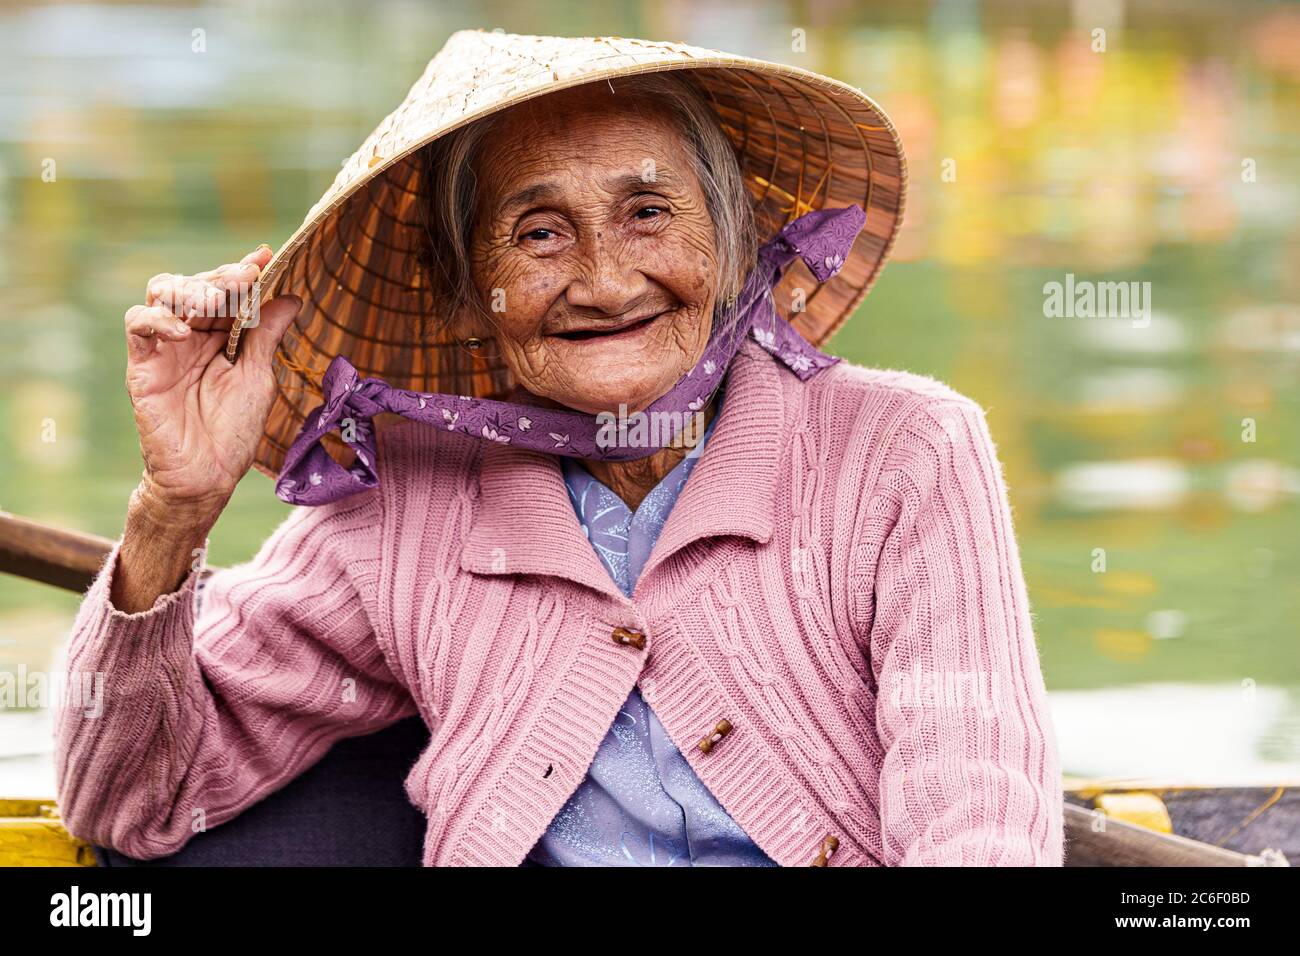 Old Vietnamese woman in violet sweater holds her hat while smiling Stock Photo